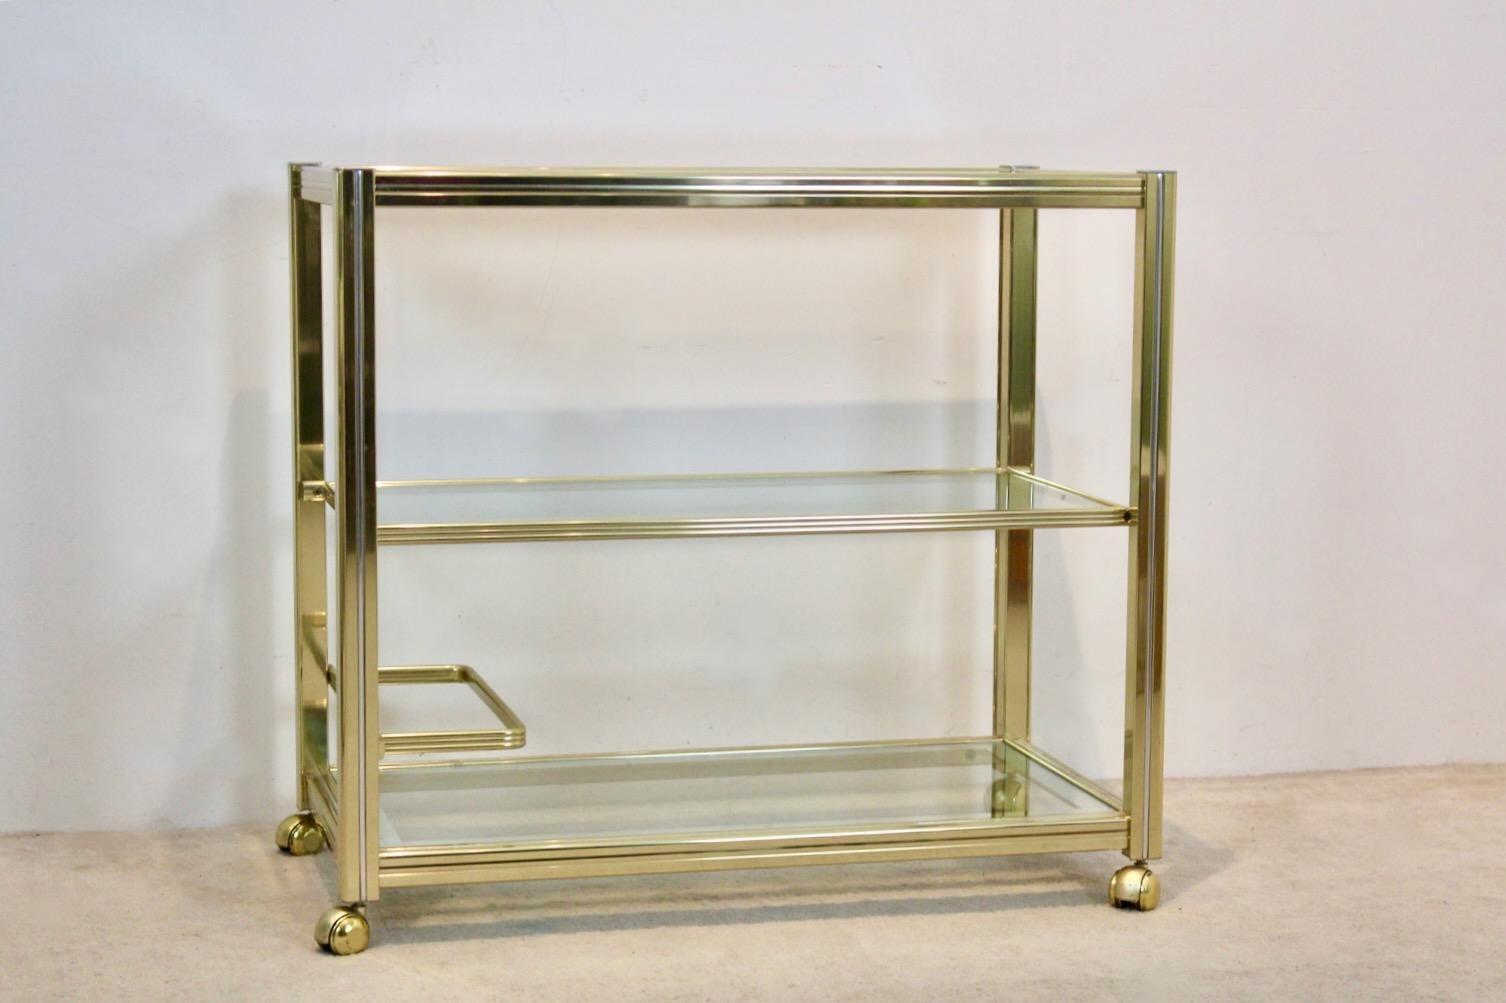 Extraordinary Pierre Vandel Brass and Chrome Bar Cart, France 1970s For Sale 2